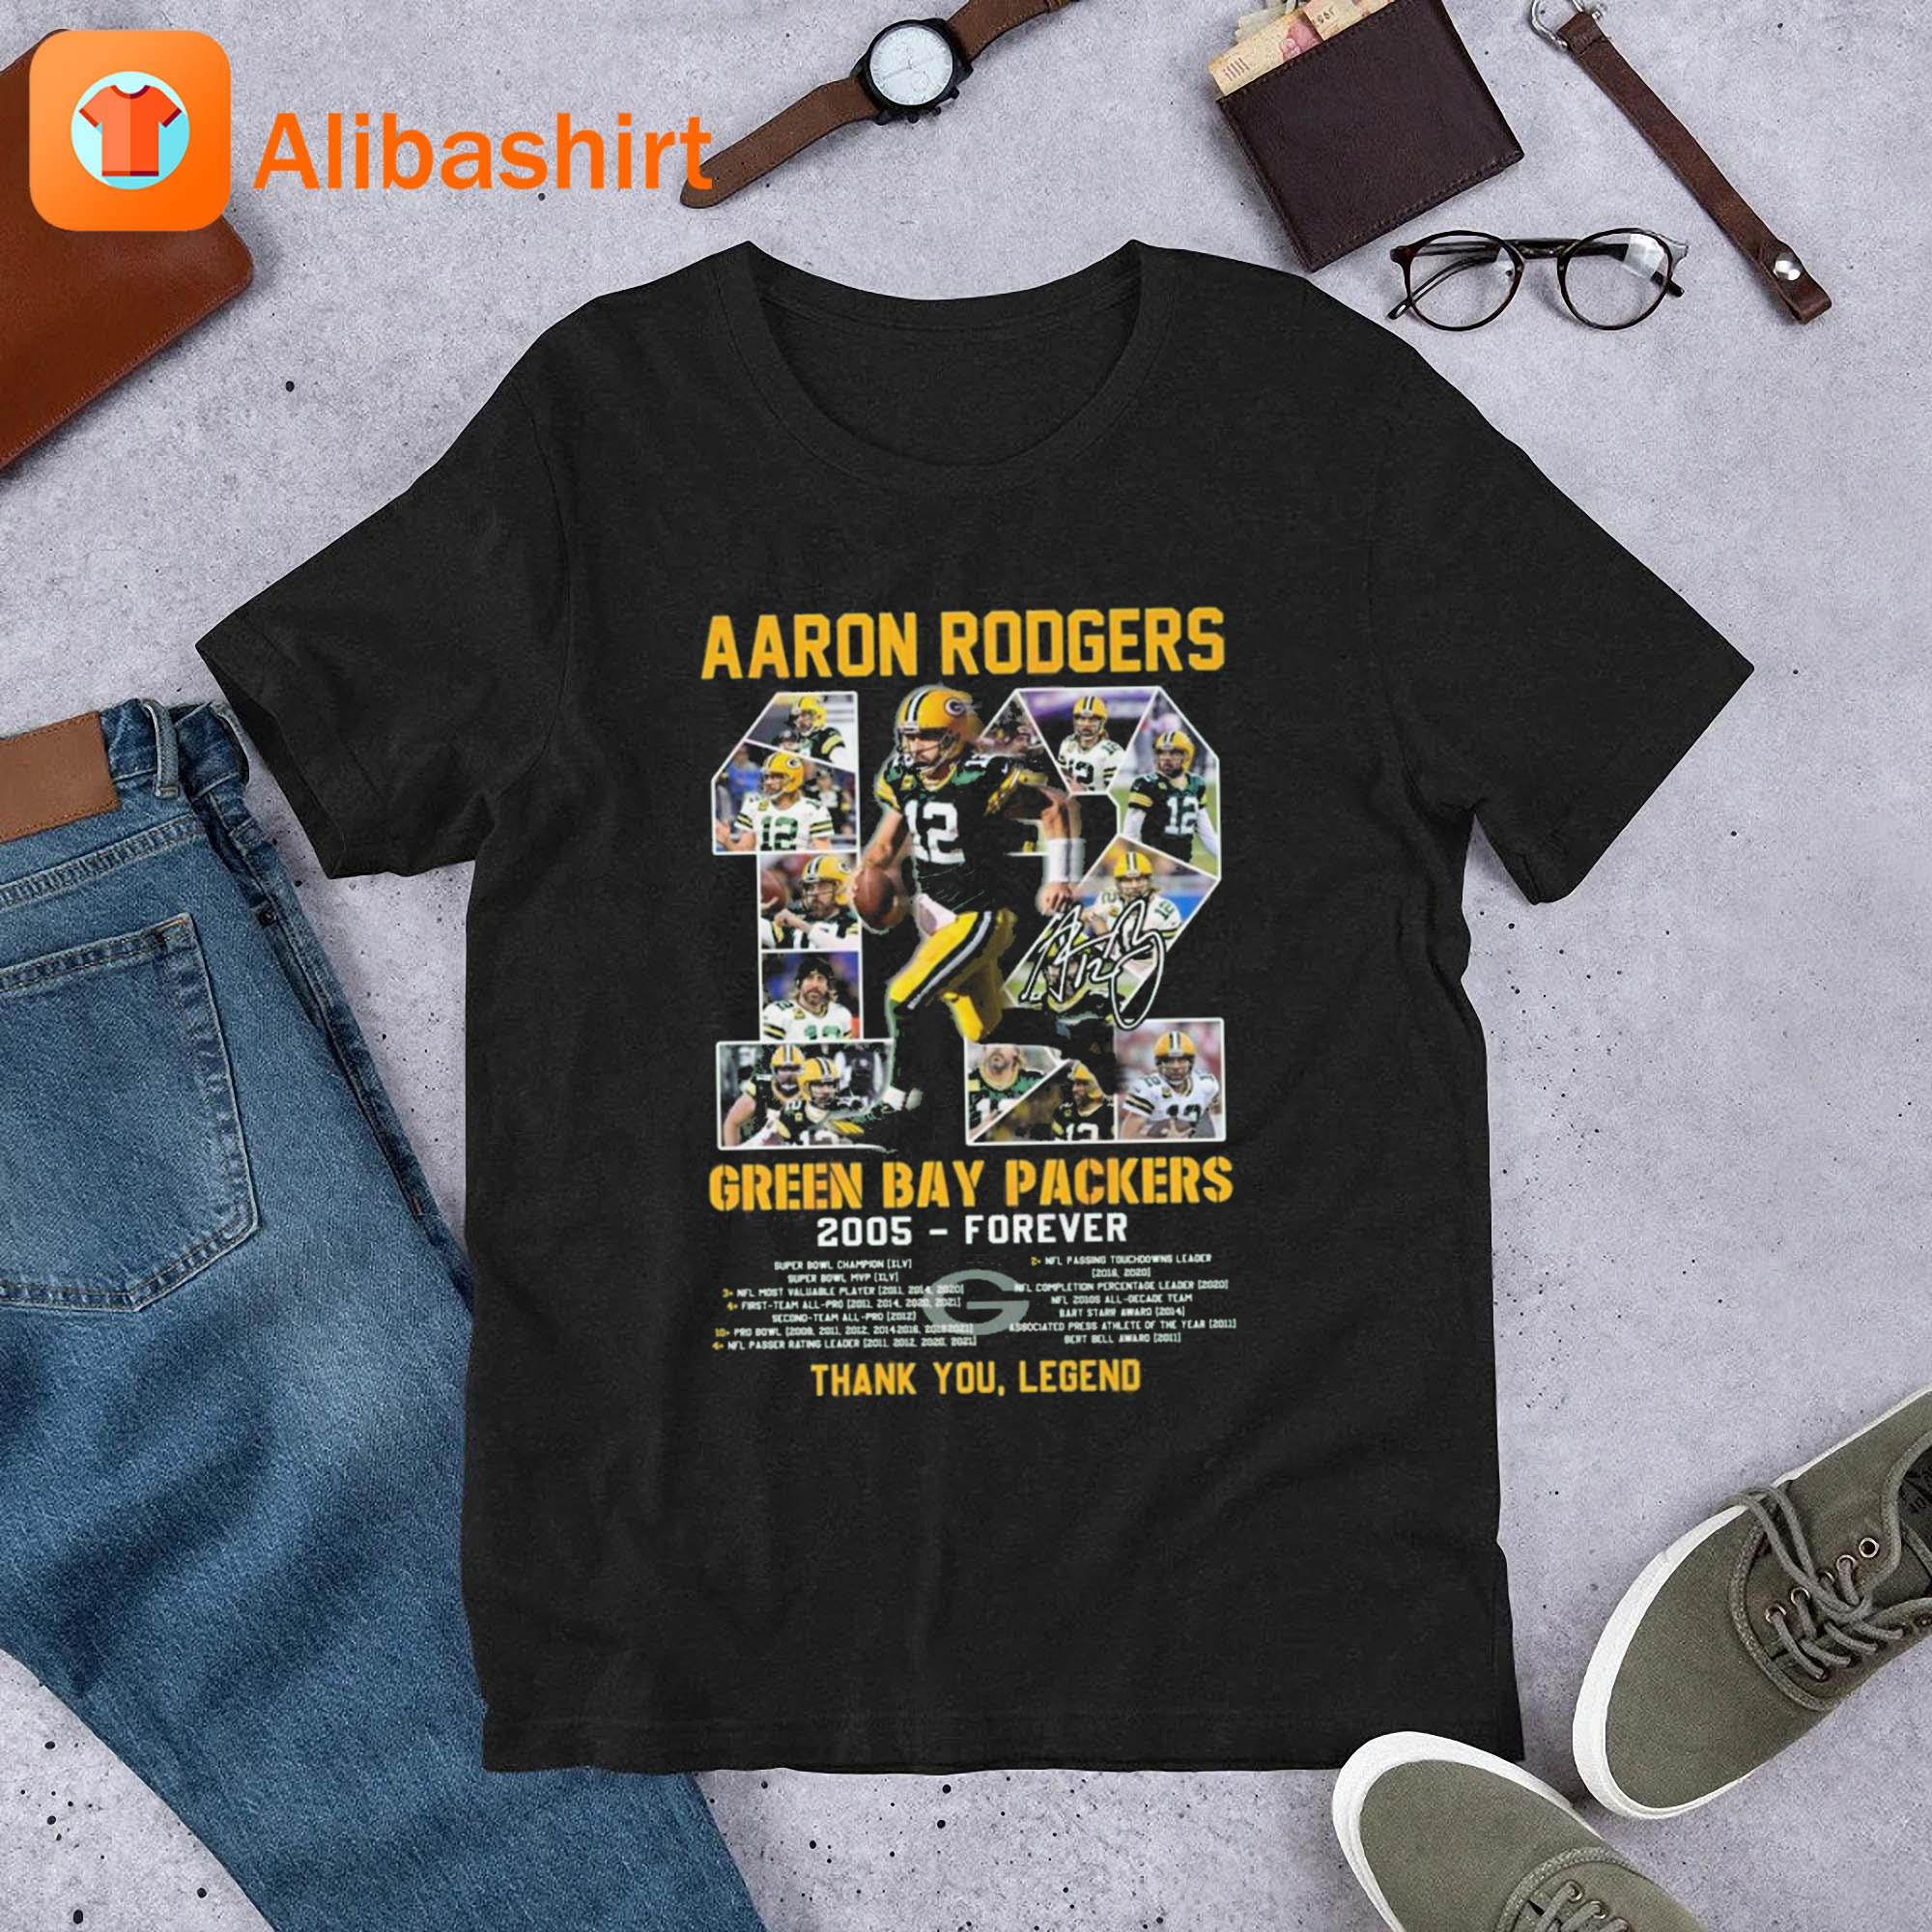 Aaron Rodgers 12 Green Bay Packers 2005-Forever Thank You Legend Signature shirt